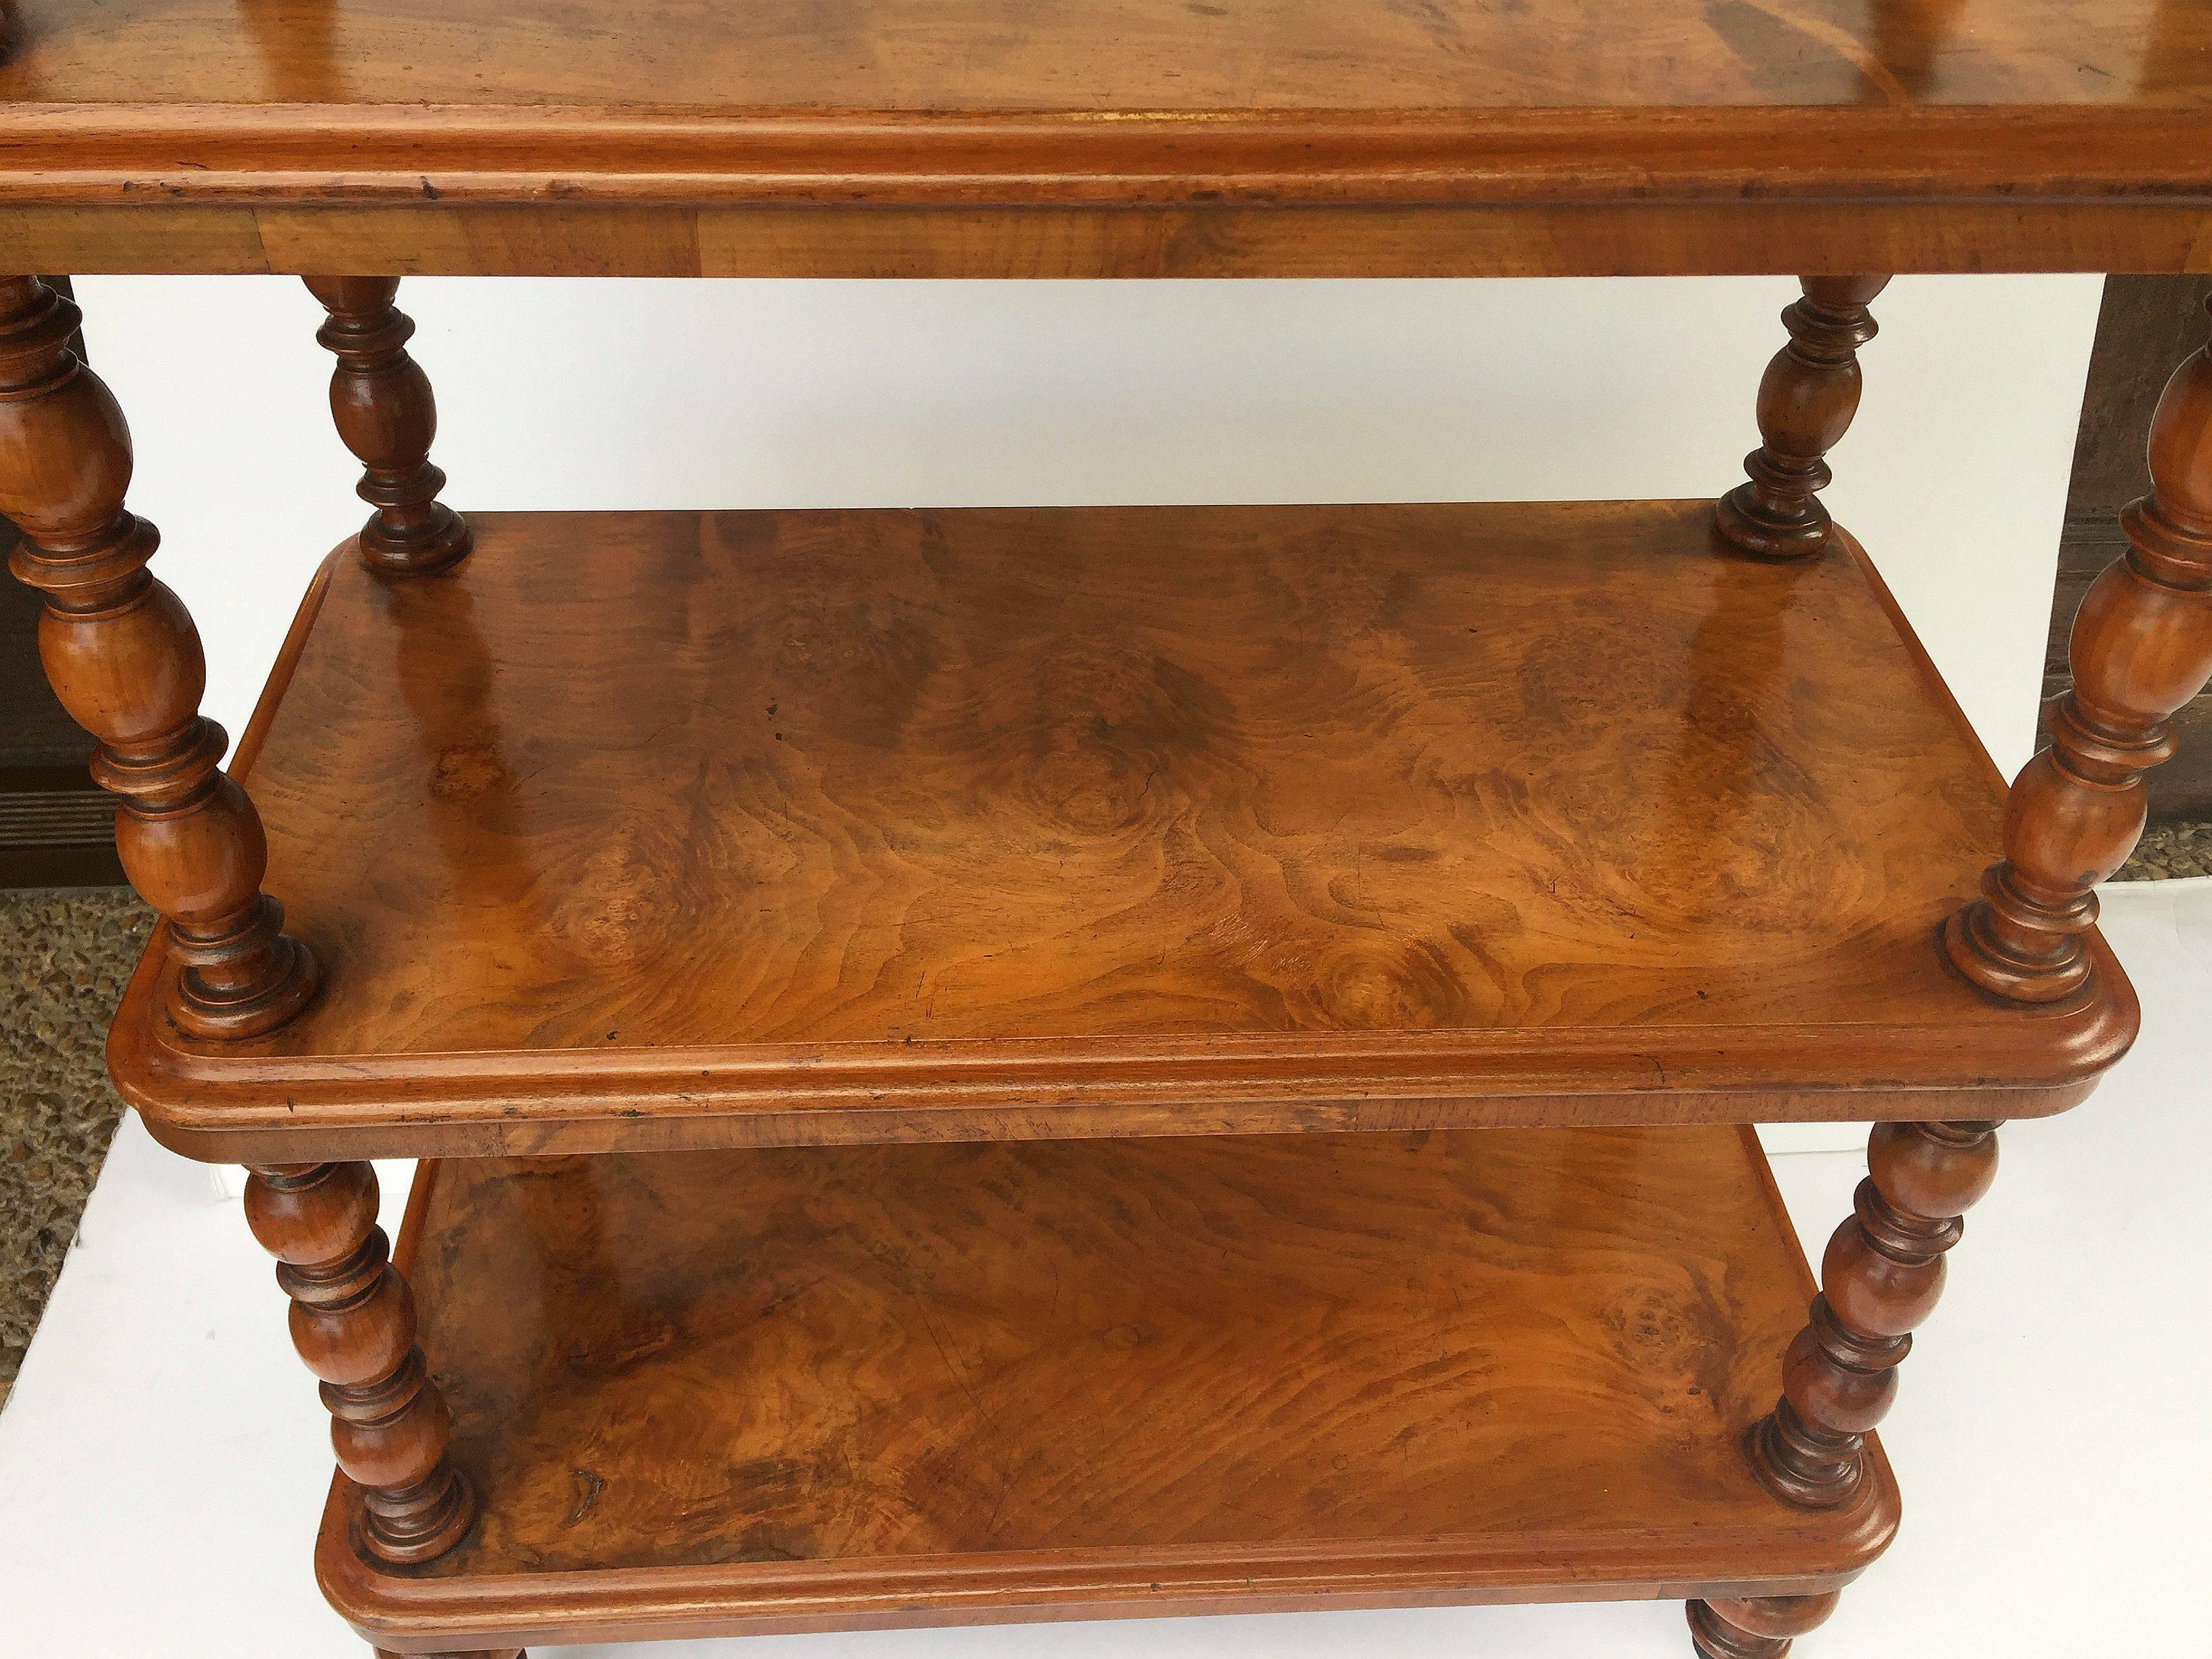 Wood English Standing Shelves or Etagere of Burr Walnut